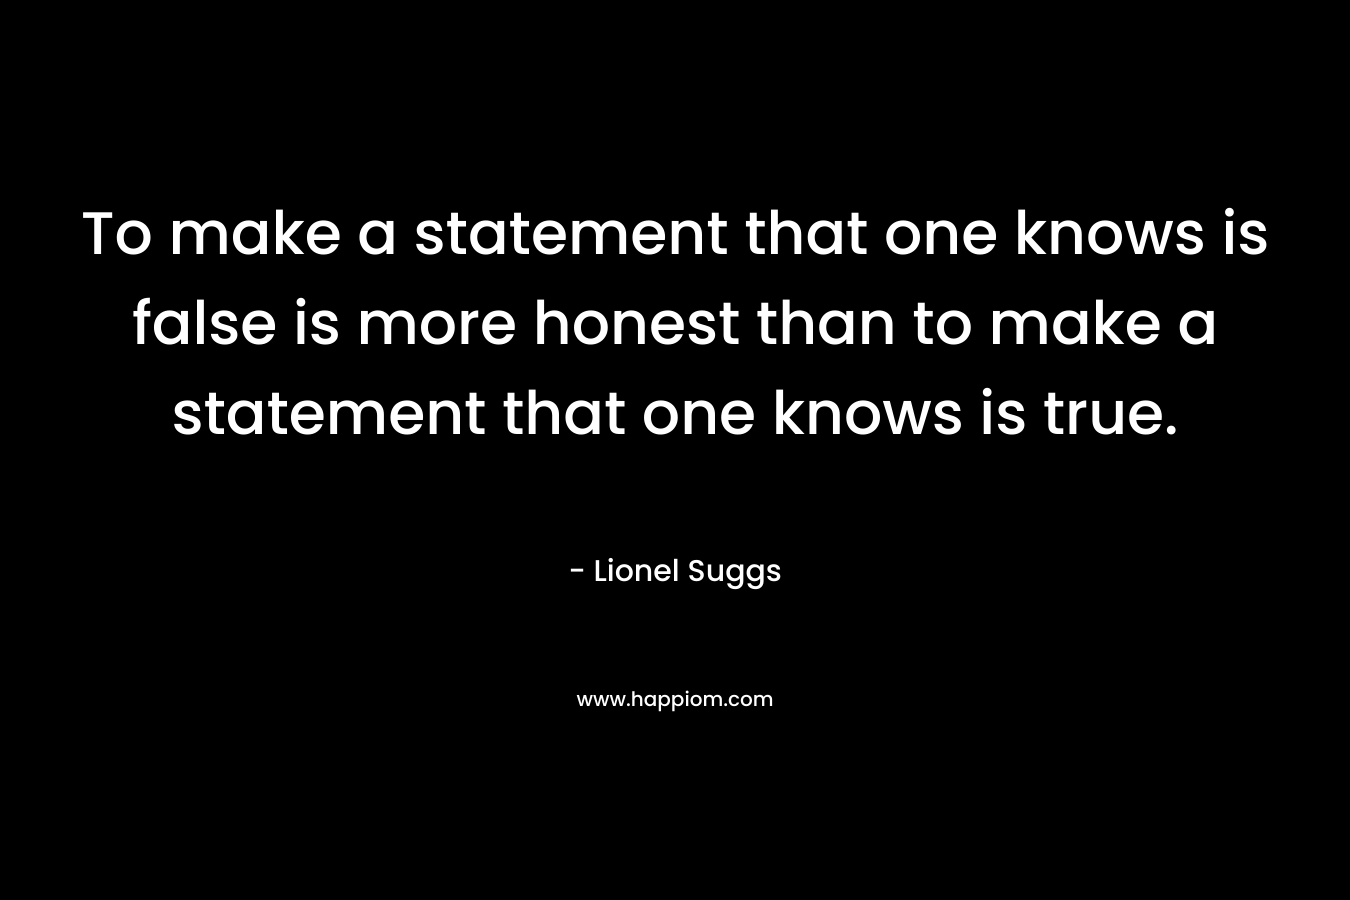 To make a statement that one knows is false is more honest than to make a statement that one knows is true.